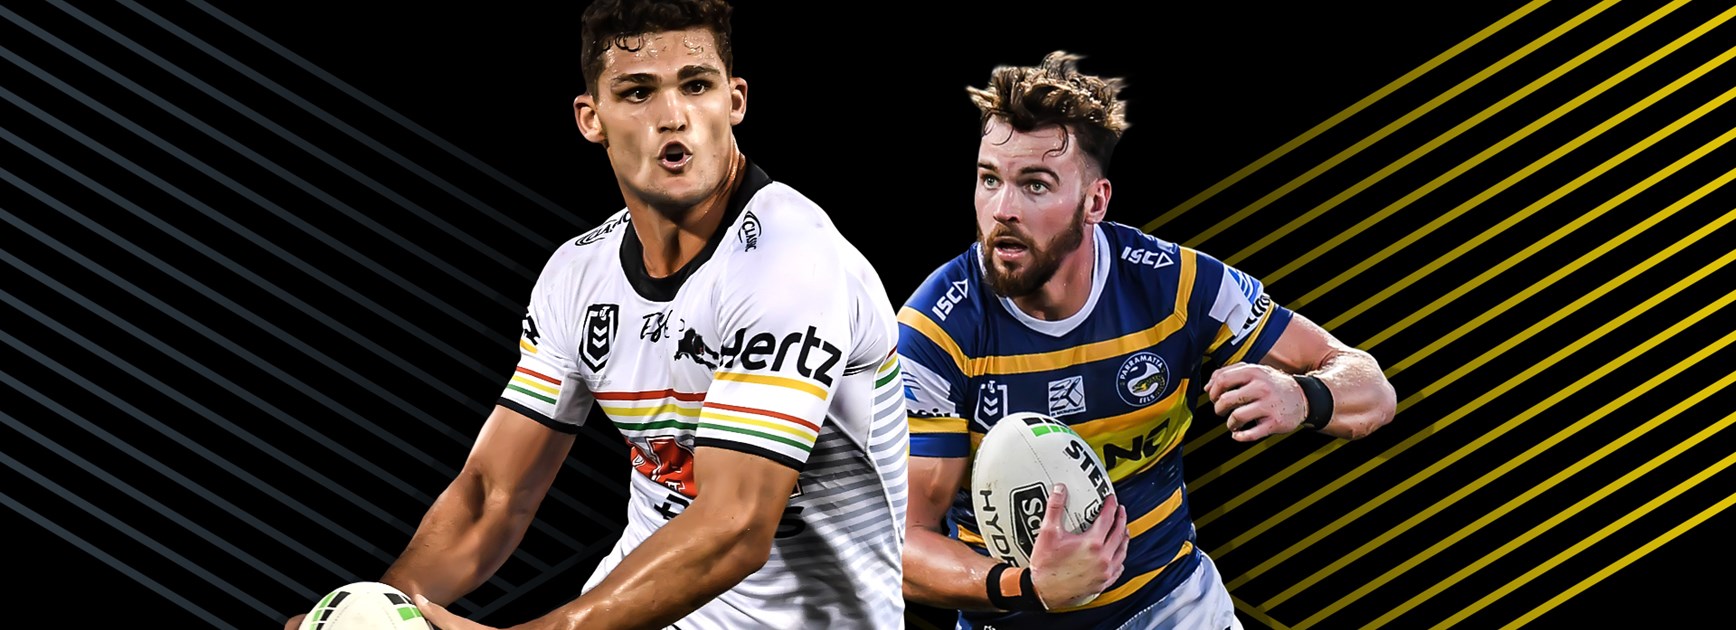 Match Preview - Panthers v Eels, Round One